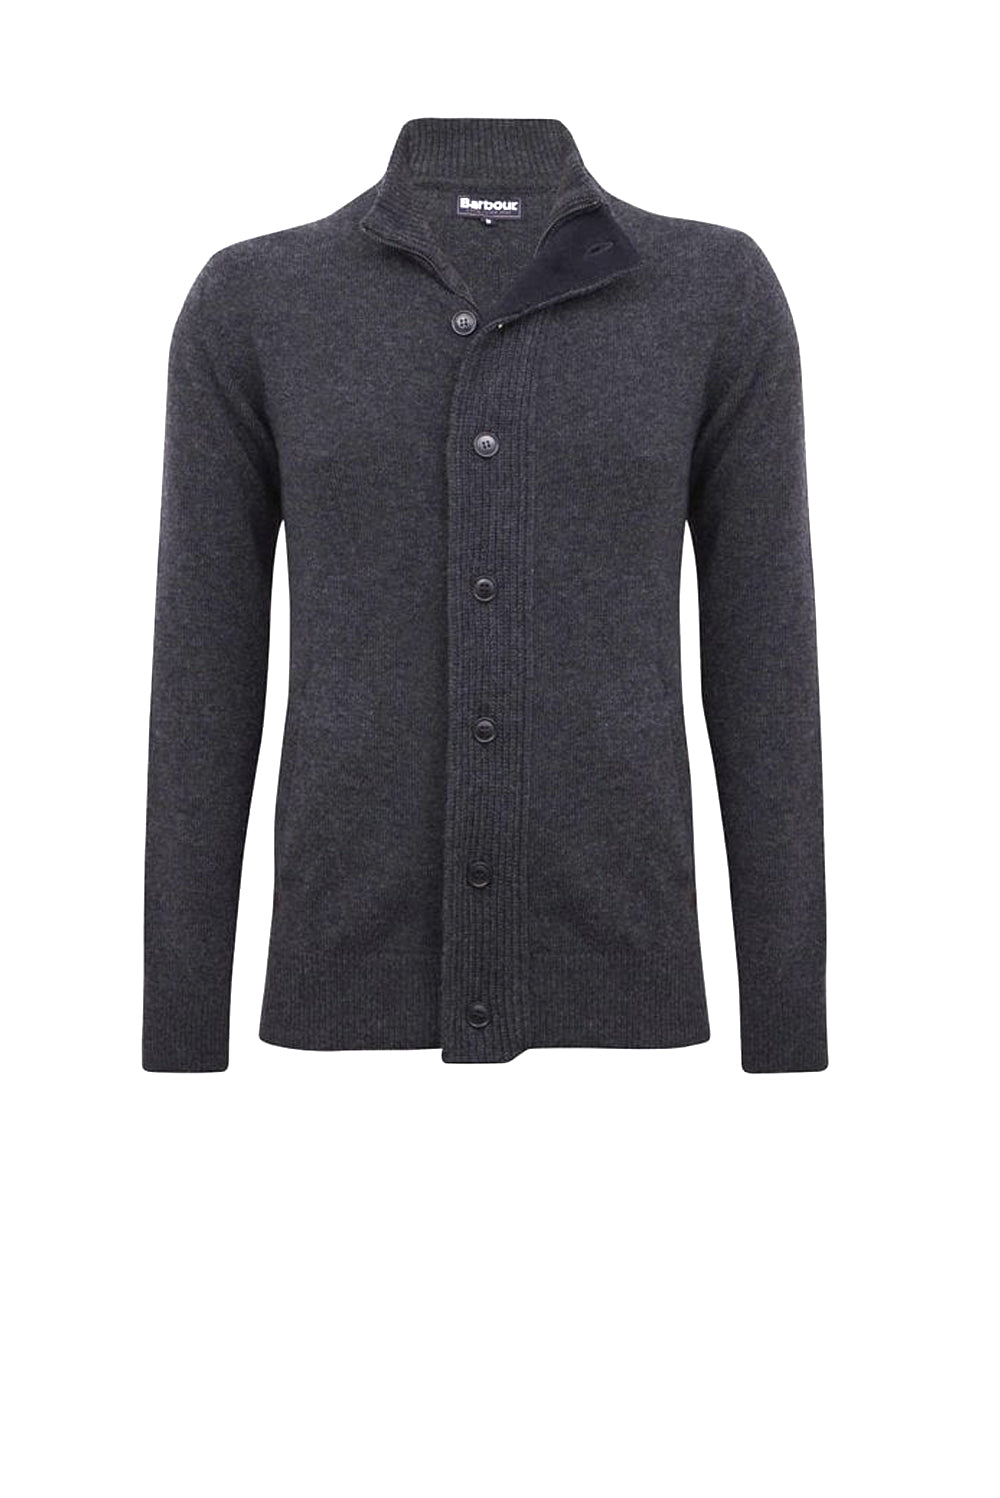  Barbour Woolen Knitted Cardigan Charcoal Marl Uomo - 1